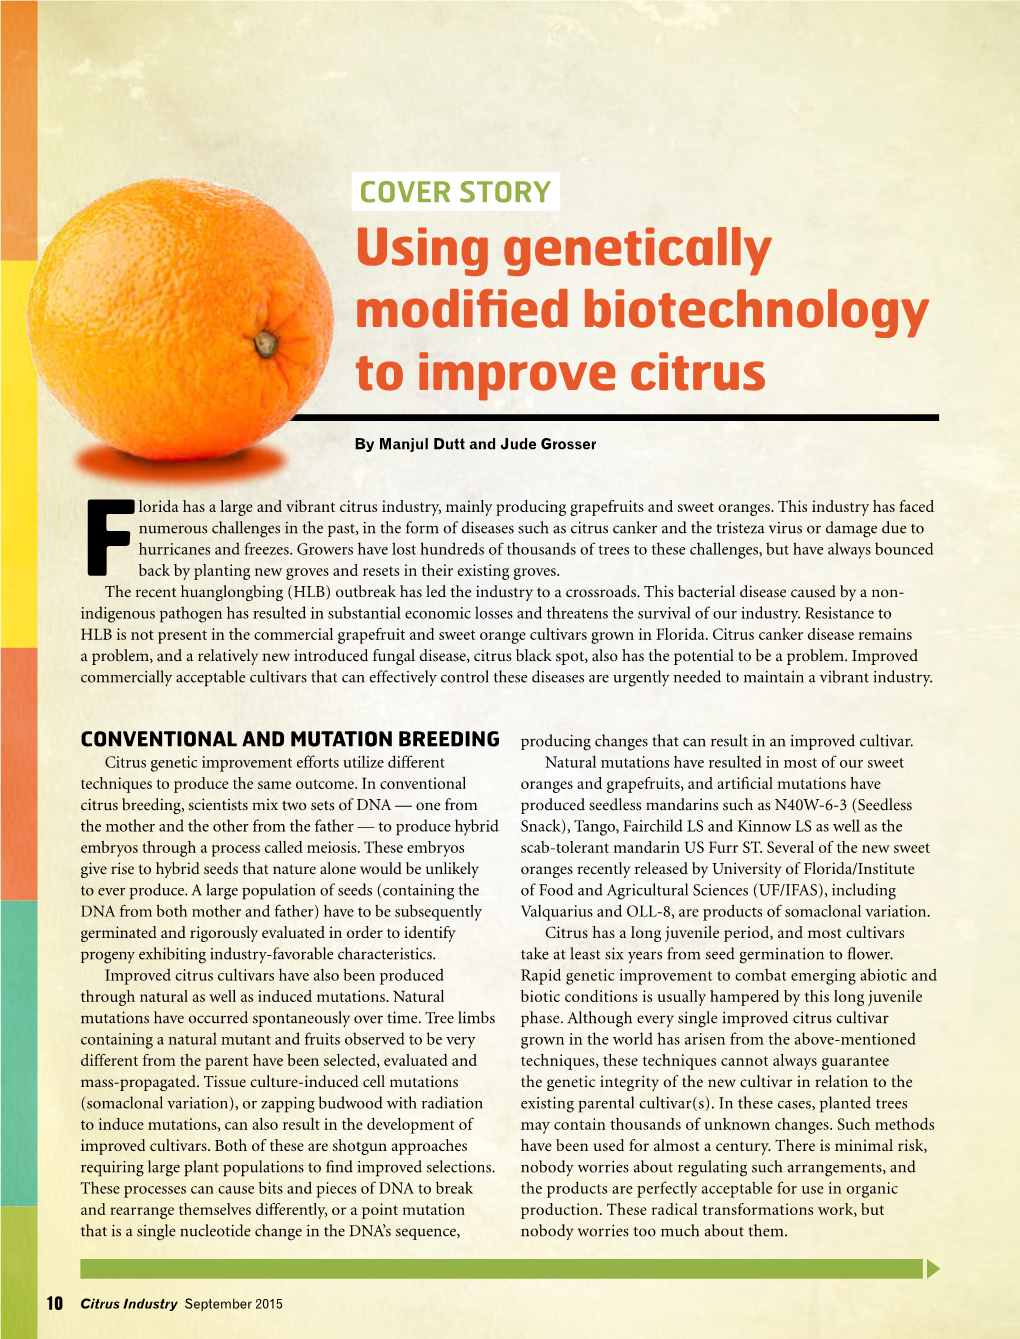 Using Genetically Modified Biotechnology to Improve Citrus